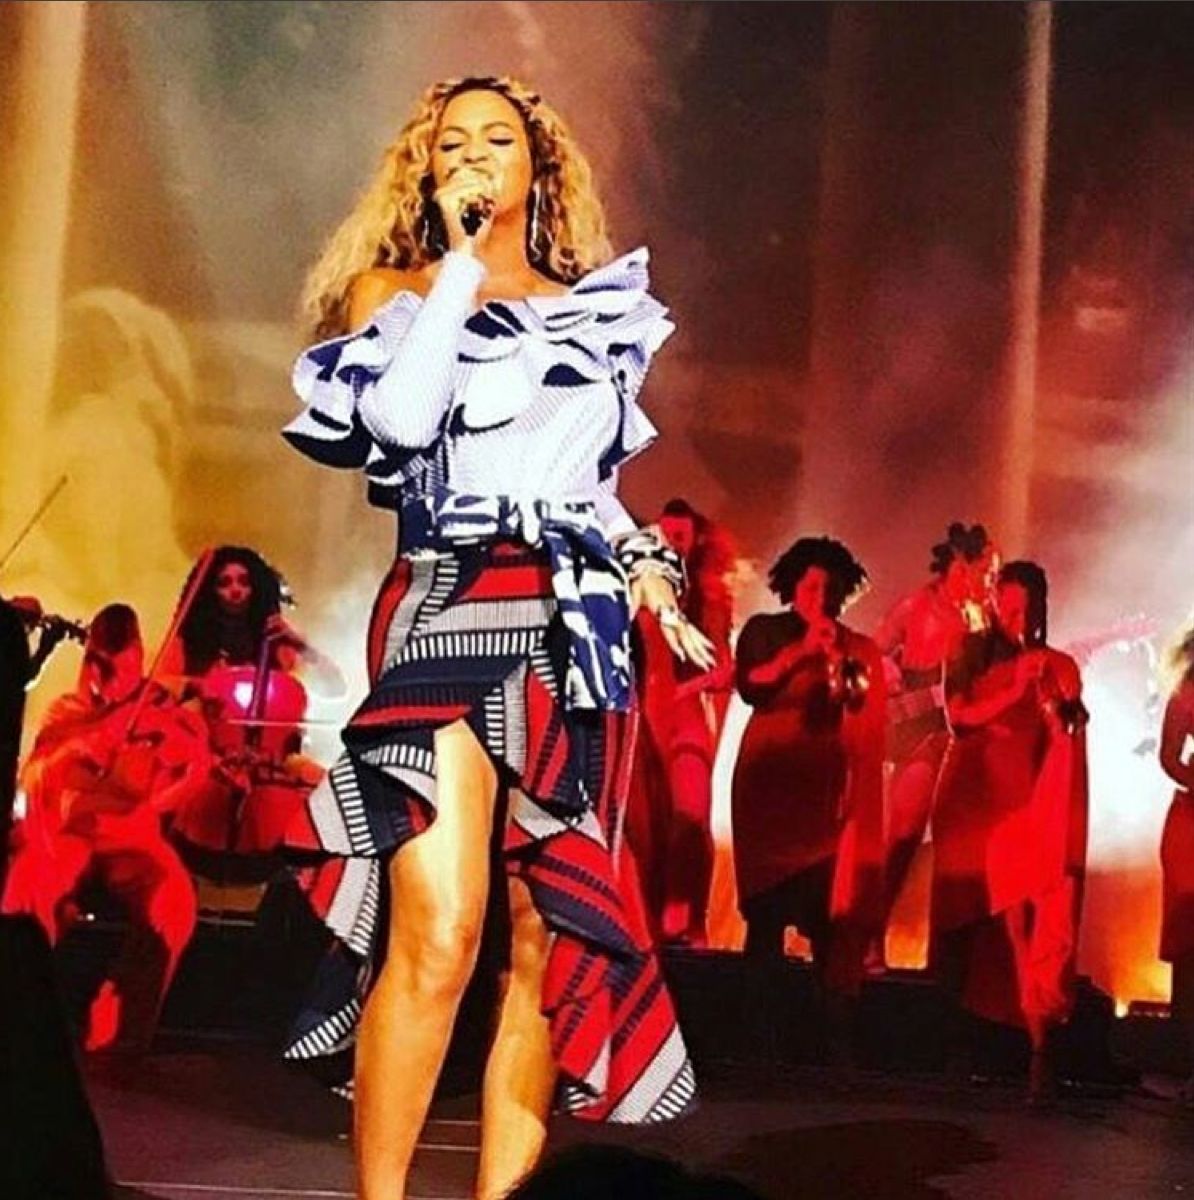 Beyonce Delivers Fresh Take on Holiday Style at Parkwood Christmas Party
